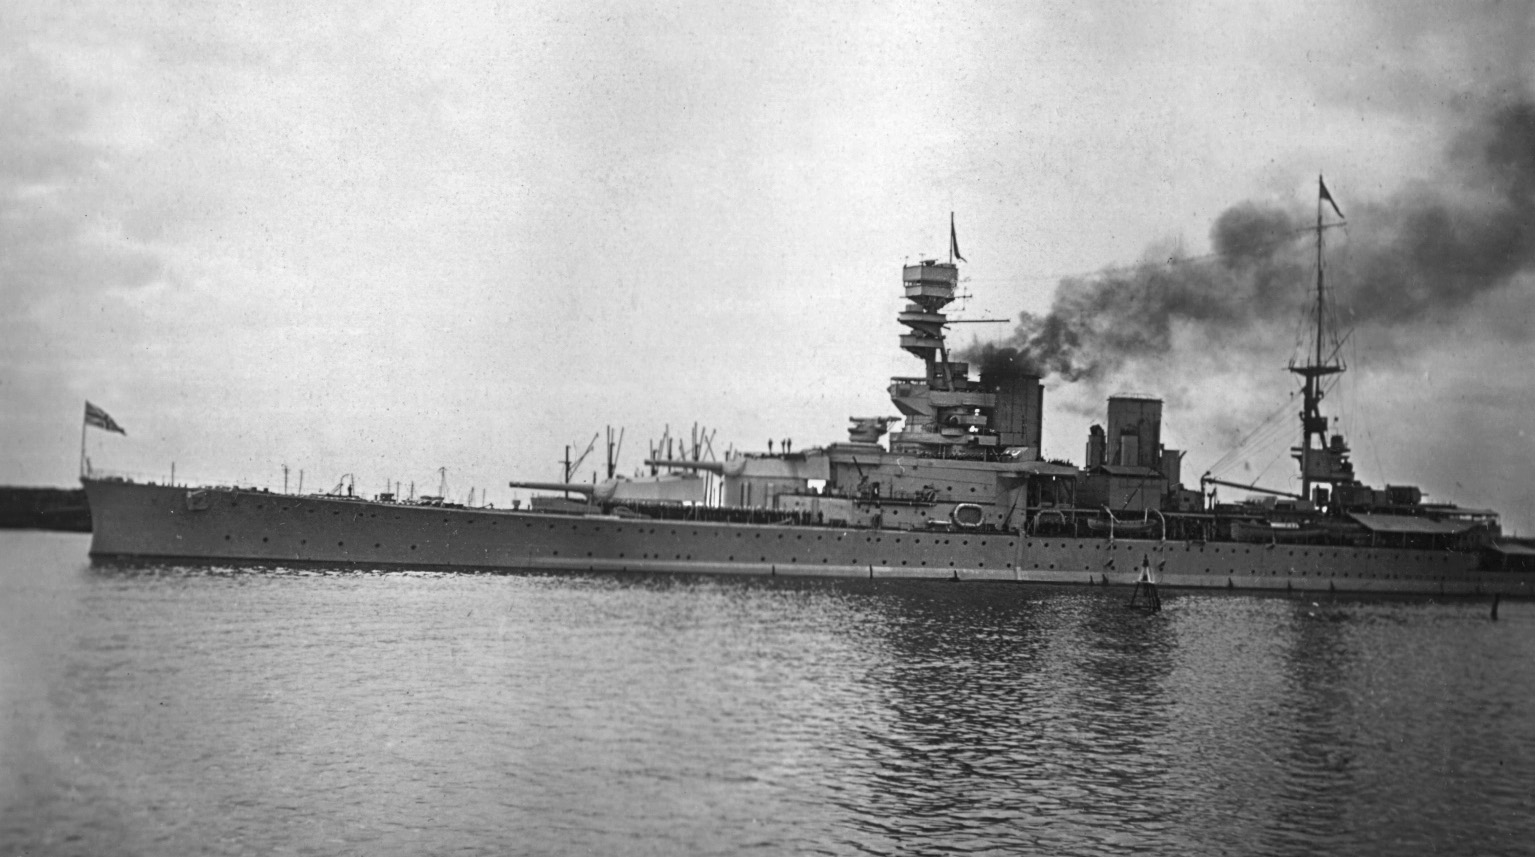 The battleship HMS Renown was one of many British ships called to assist in the search for the Bismarck.